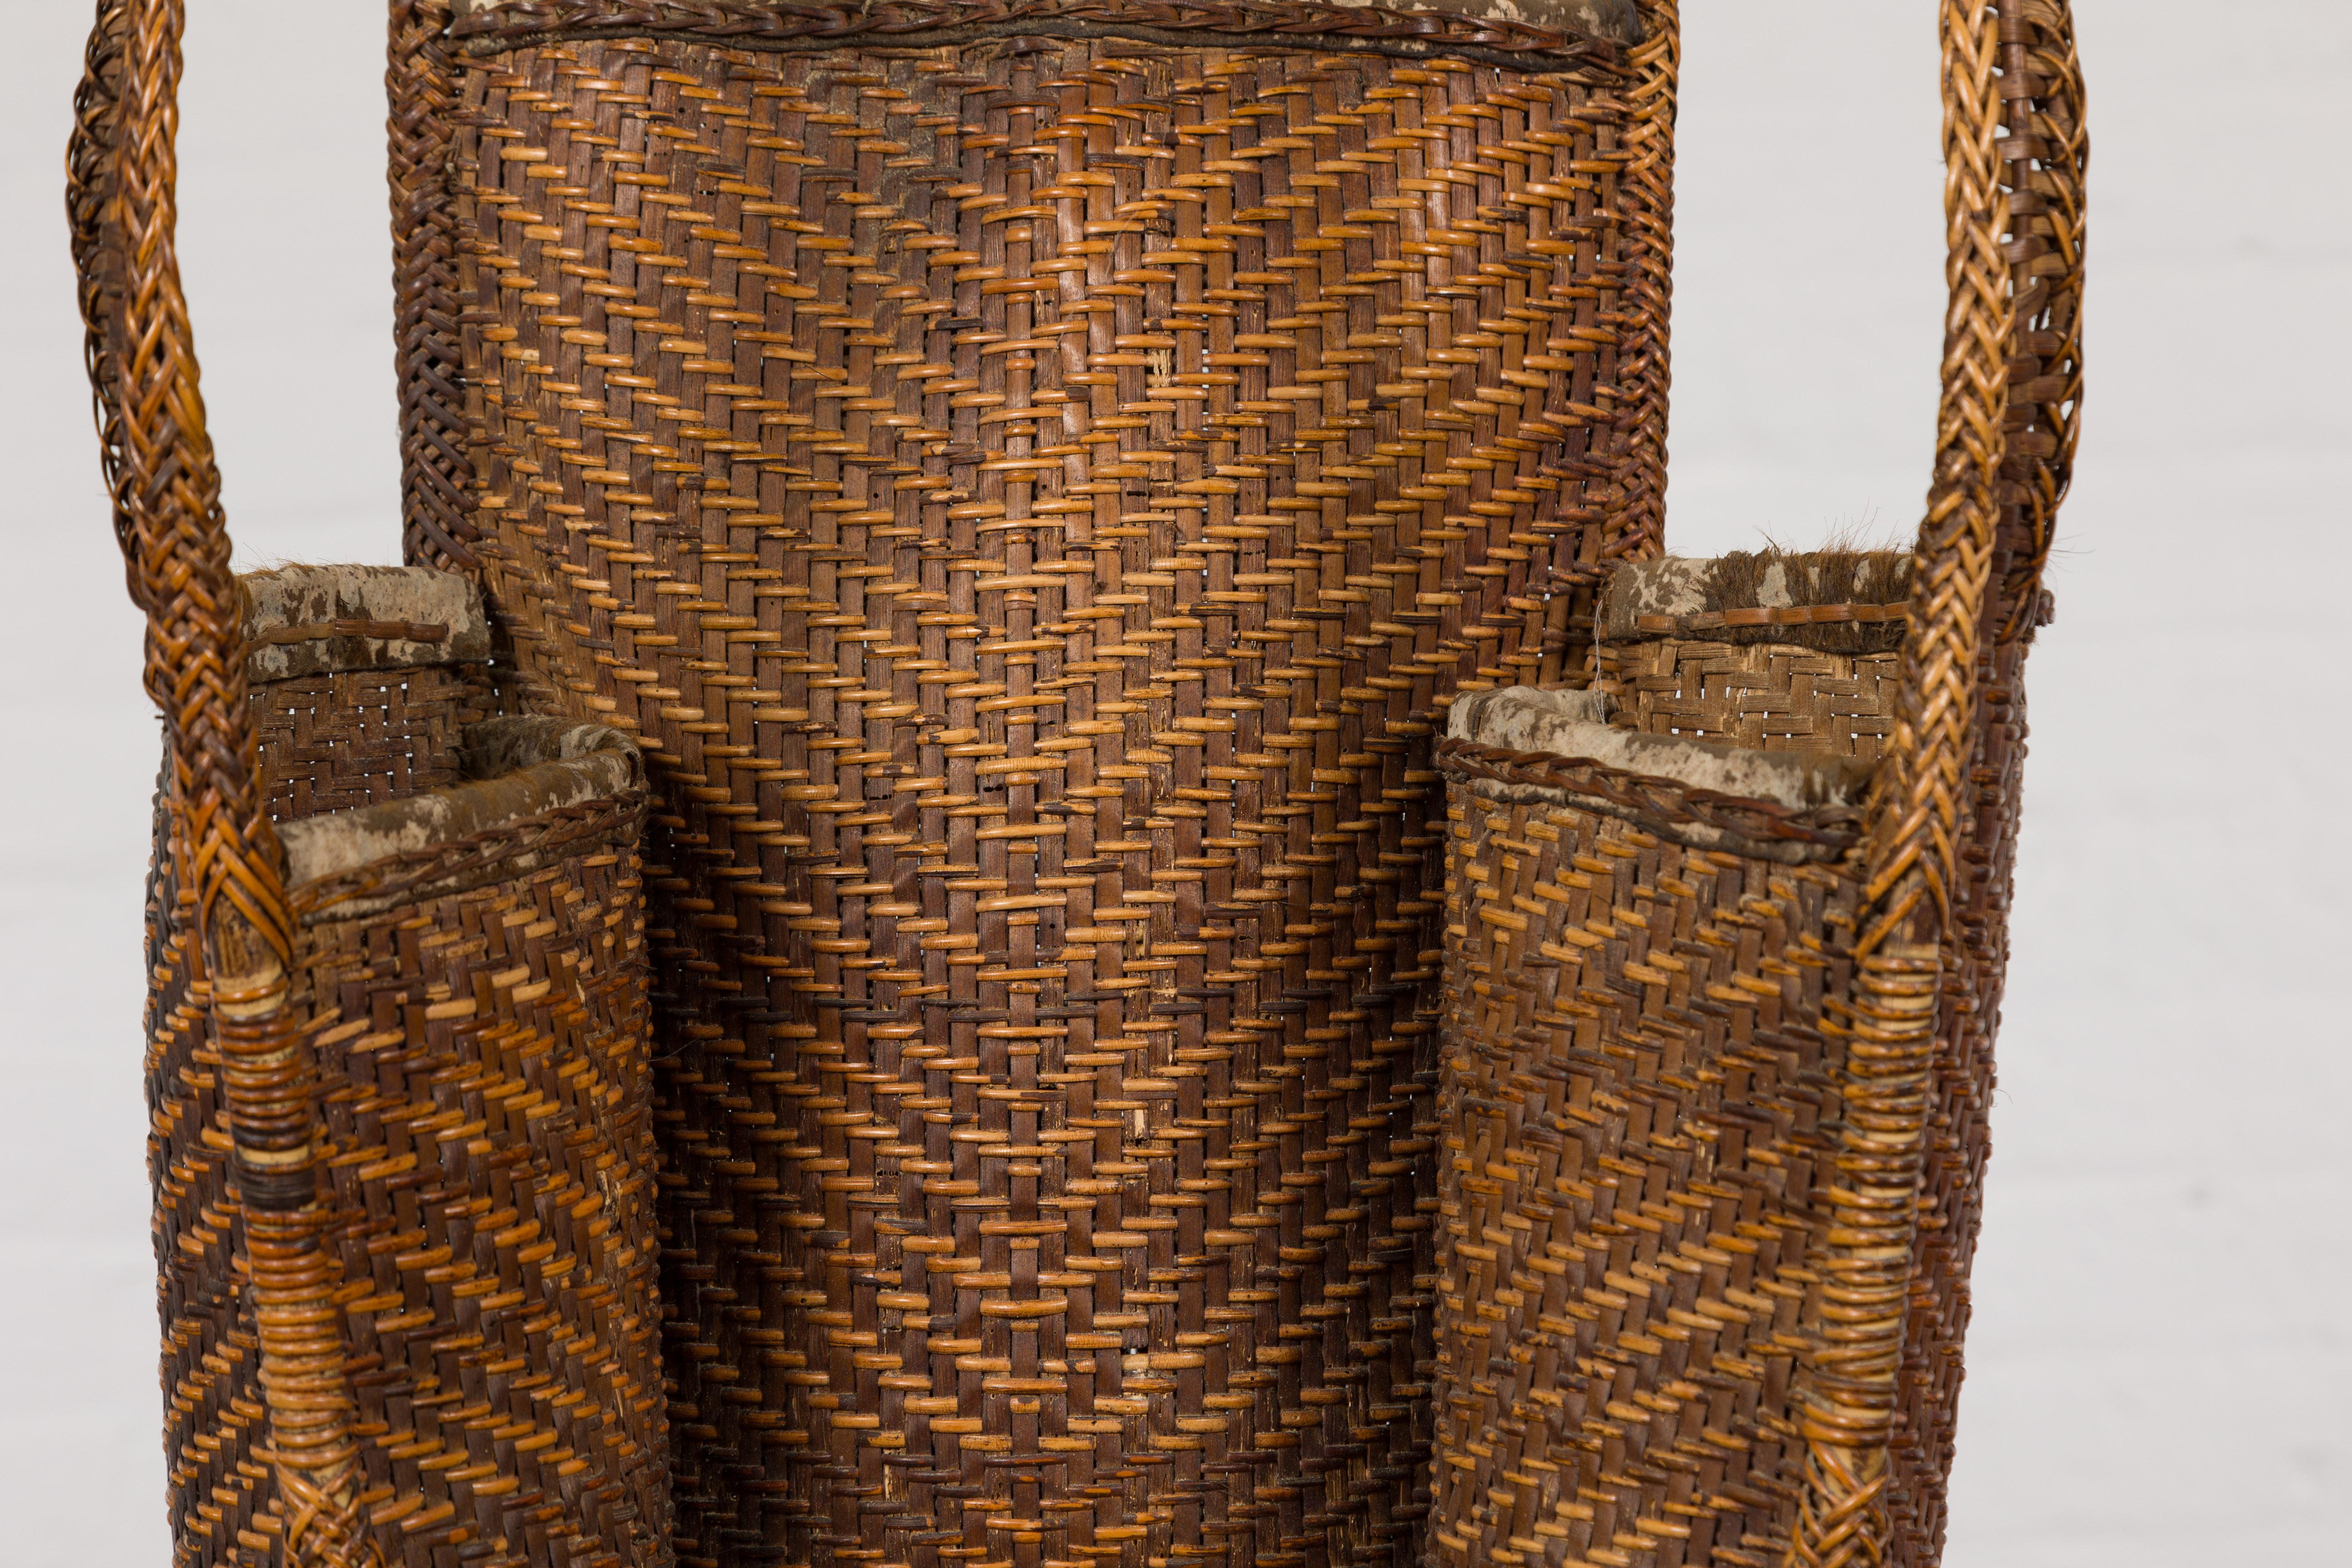 19th Century Tribal Handwoven Rattan Backpack with Inner Pockets For Sale 7